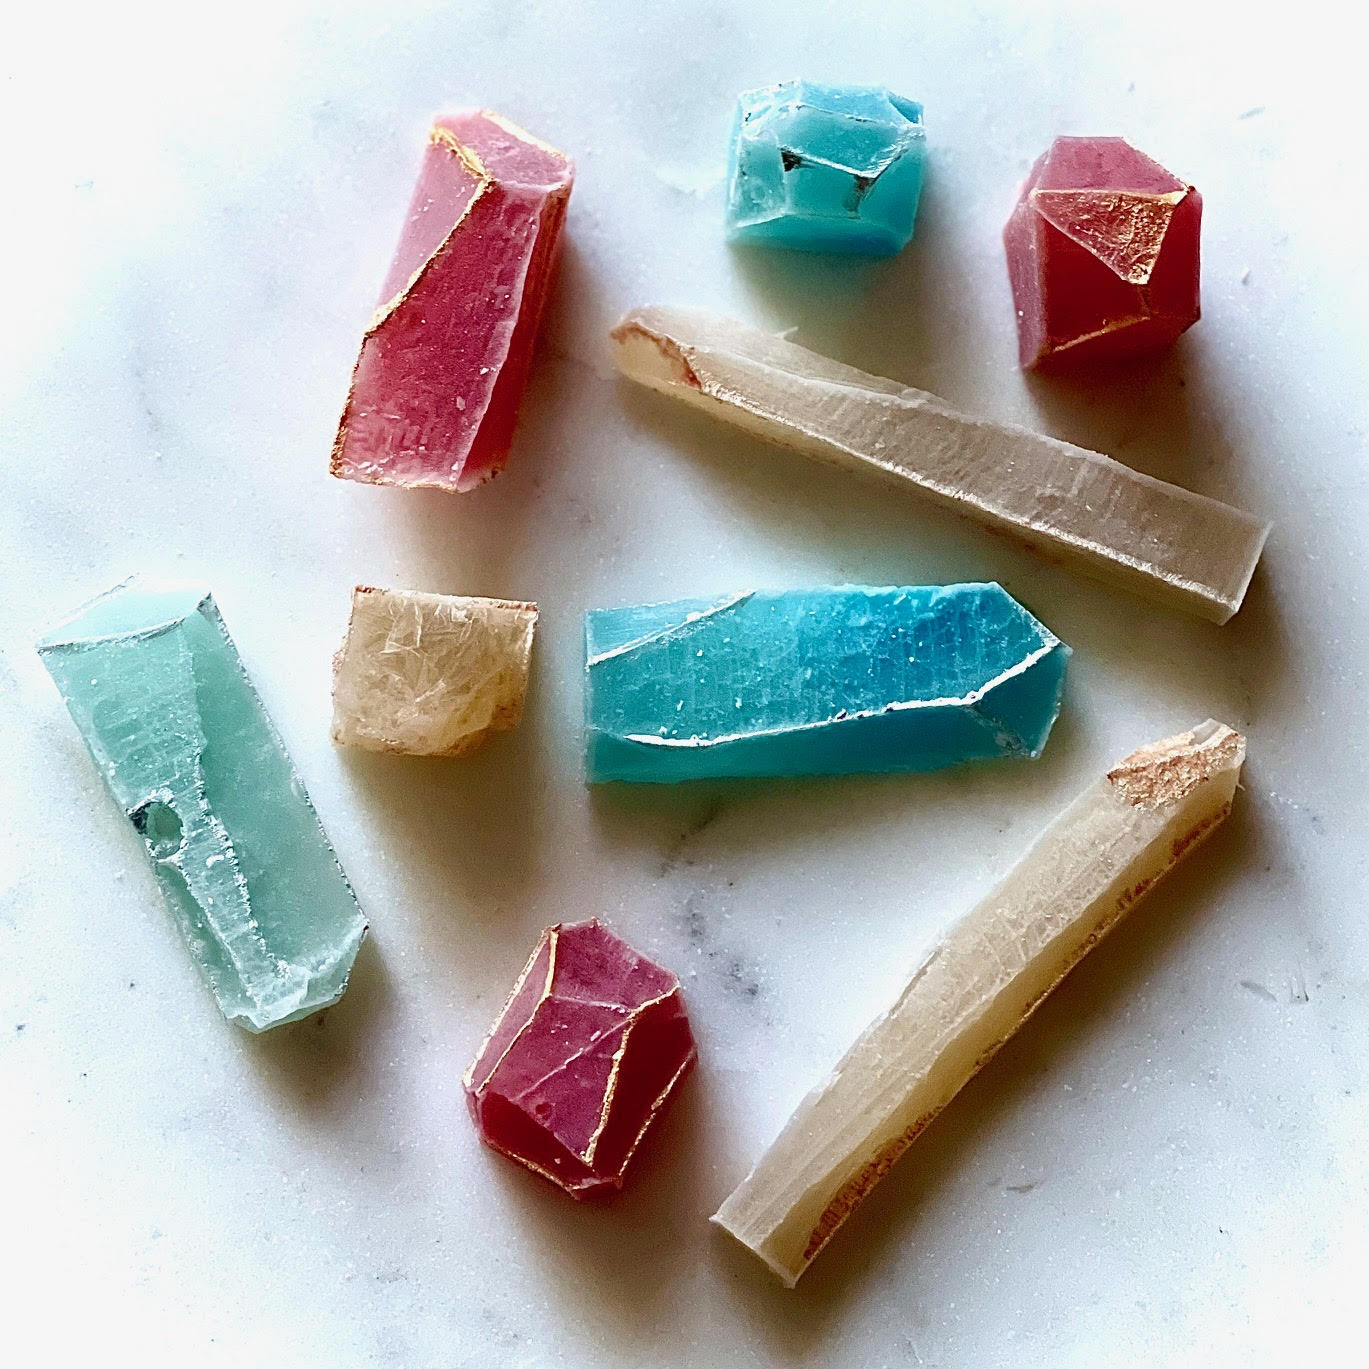 MonkGems are a sugar free crystal gummy candy. Artistic array of various flavors of edible crystals against light background comprised of white marble counter.